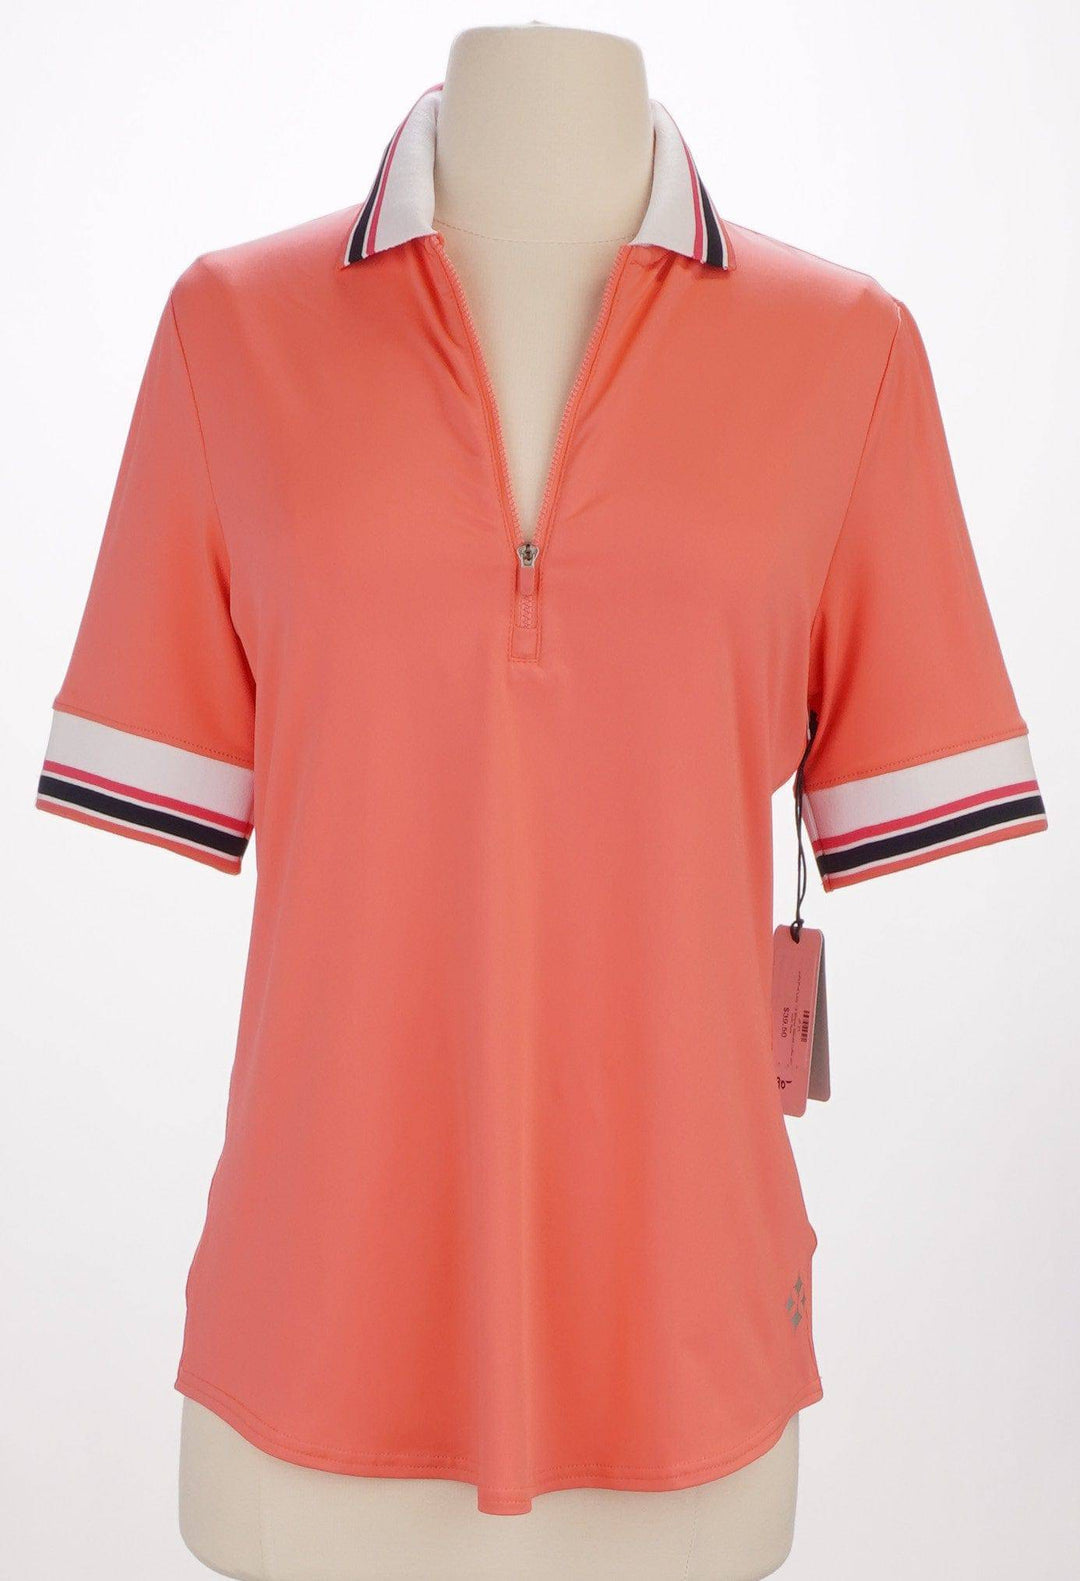 Jofit Small / Coral JoFit Pink Lady 1-2 Sleeve Ribbed Collar with Cuff Polo Size Small